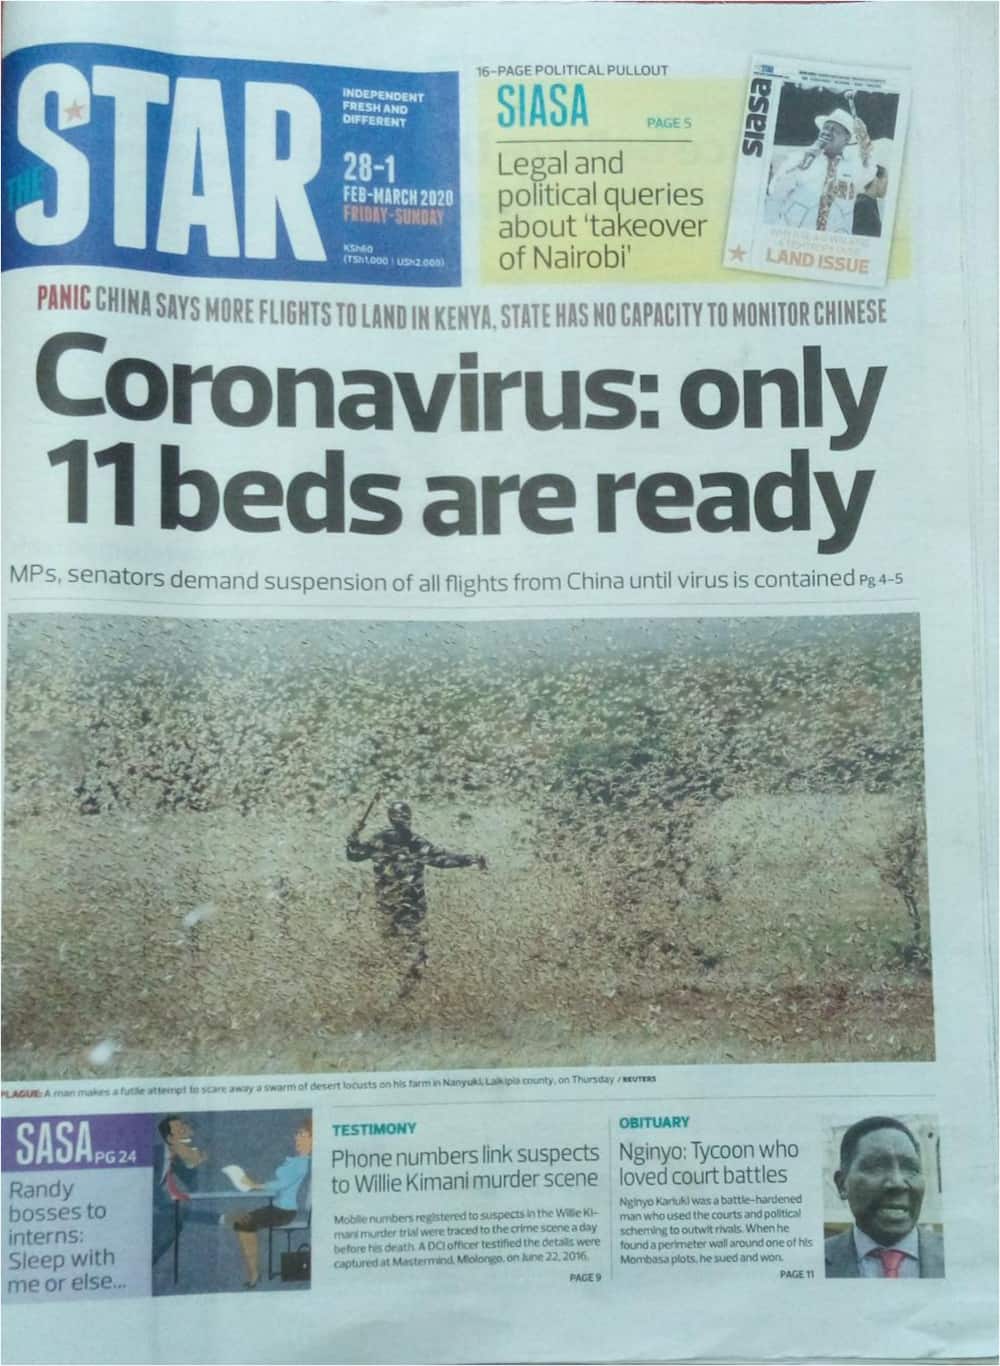 Kenyan Newspapers review for February 28: Only 11 beds ready in case of coronavirus as more flights from China are expected